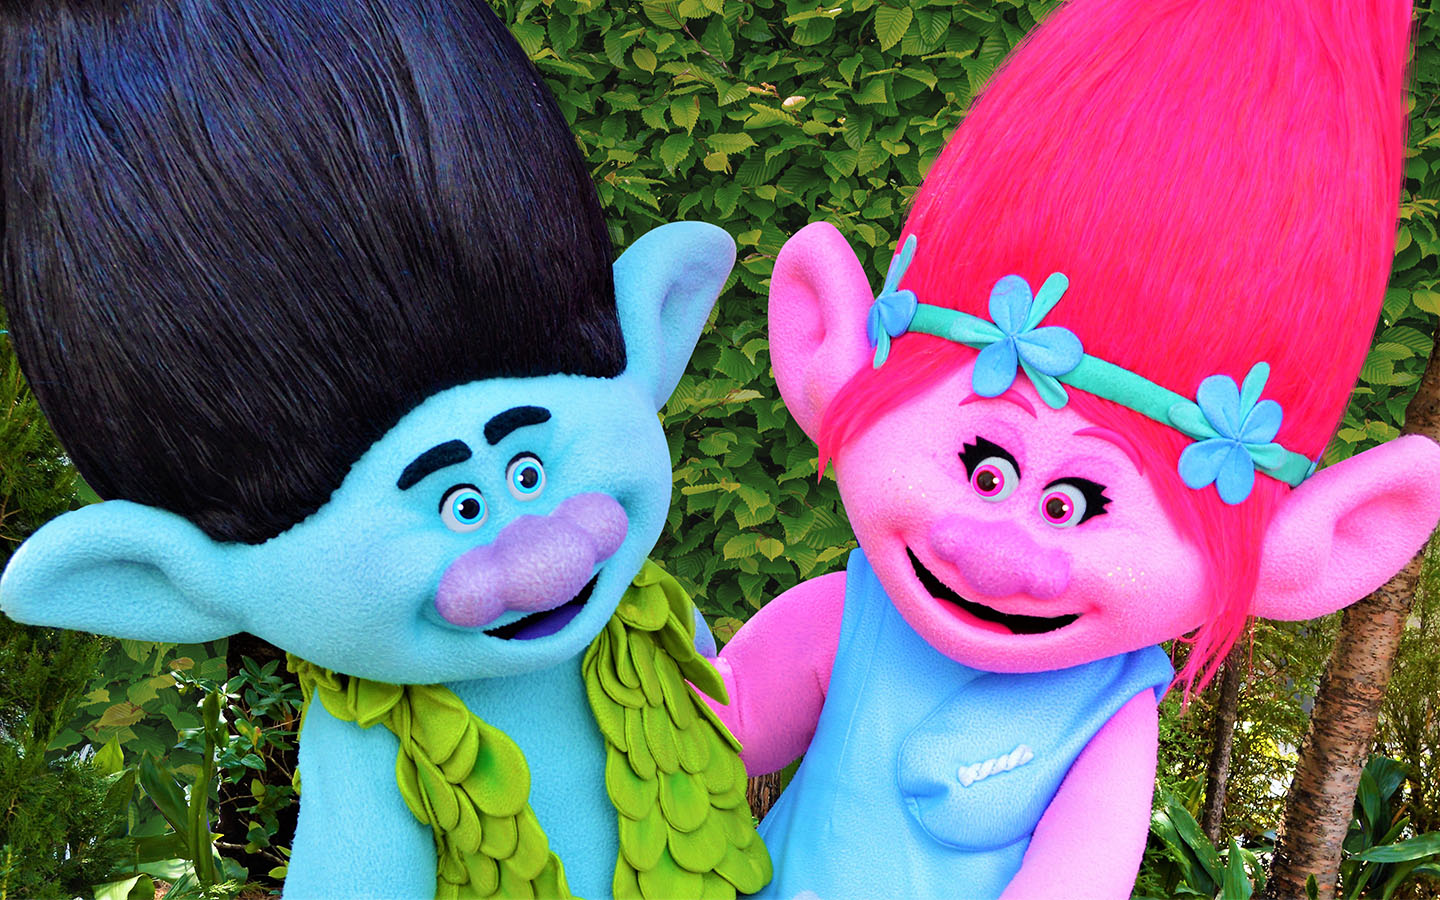 Branch and Poppy from Trolls at Universal Studios Florida